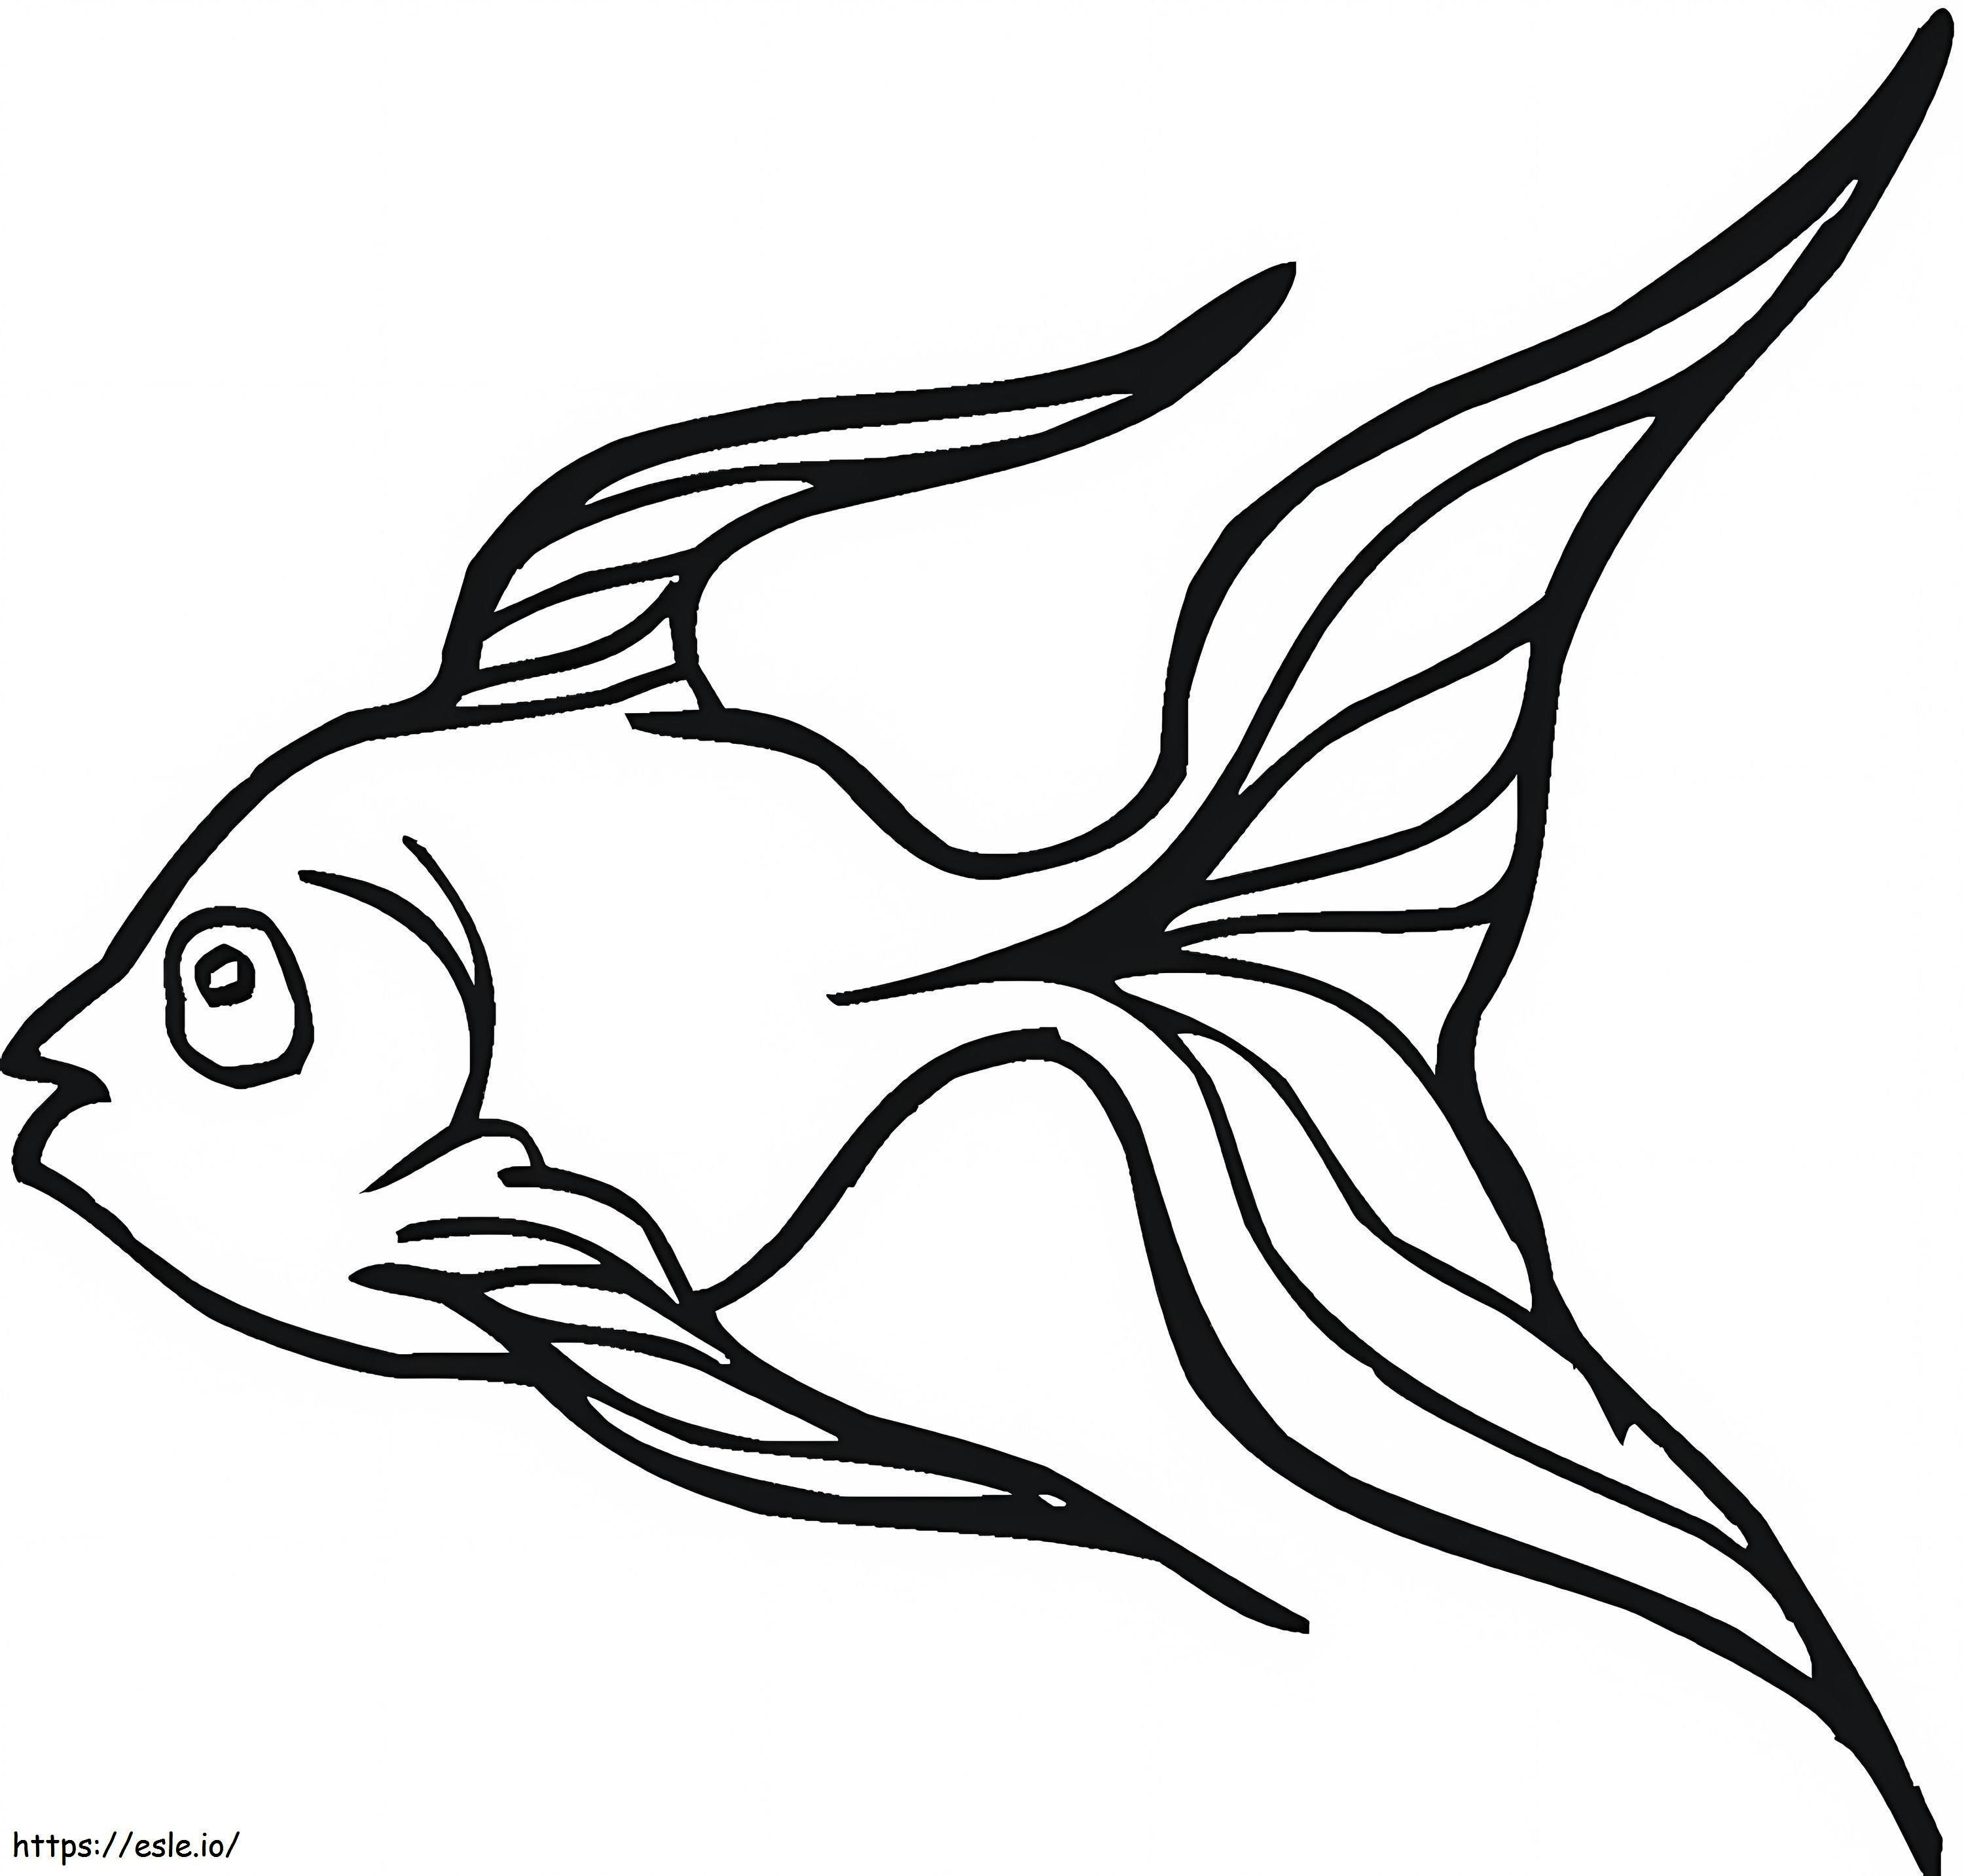 Goldfish 4 coloring page